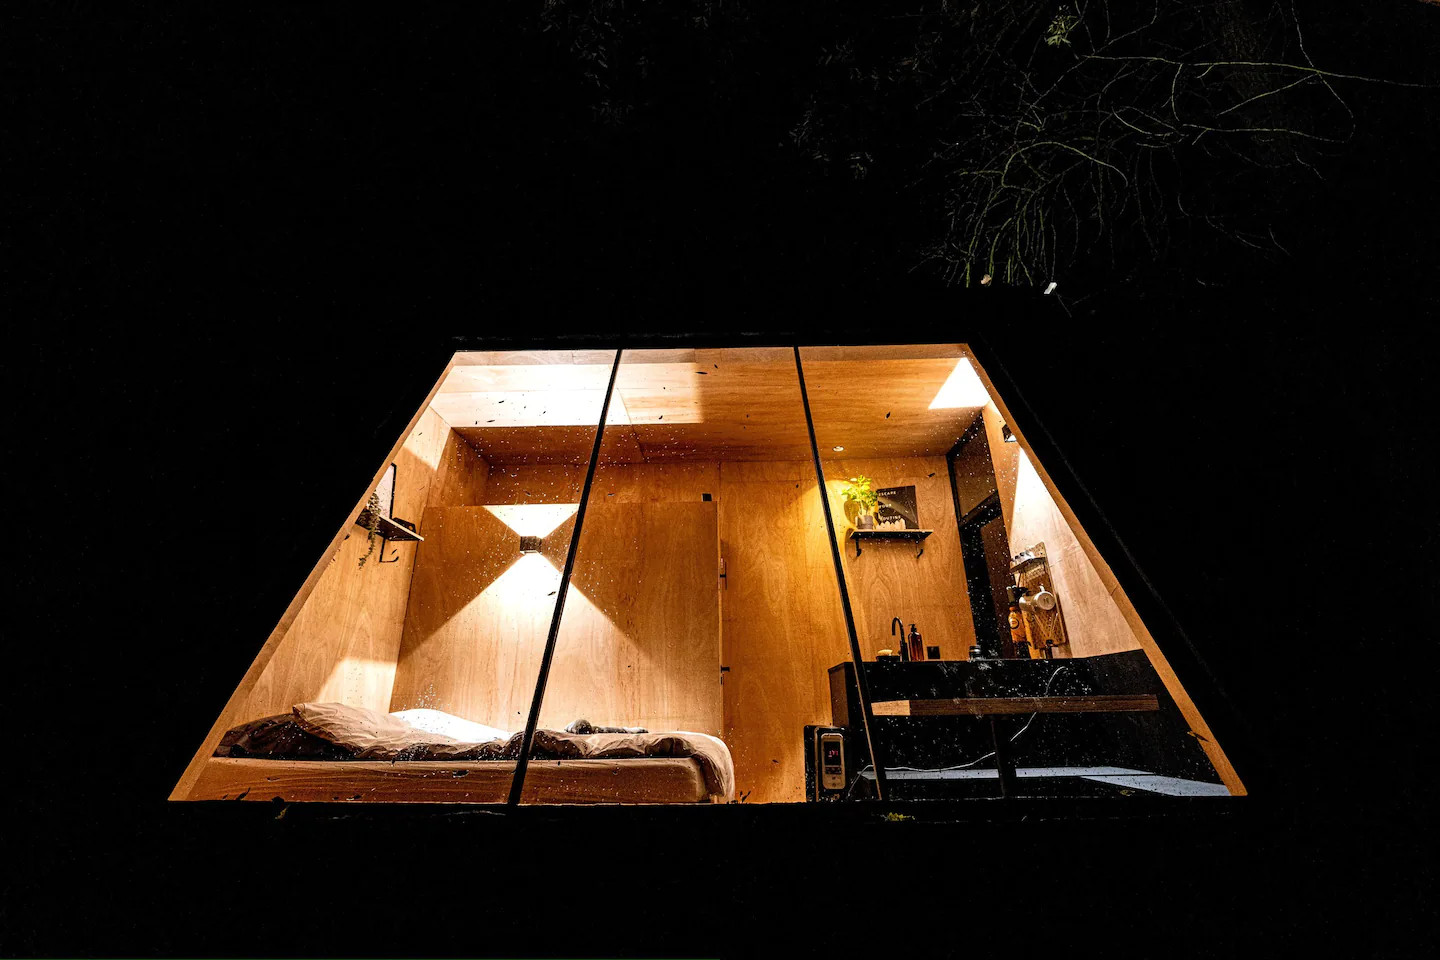 tiny house vue nuit